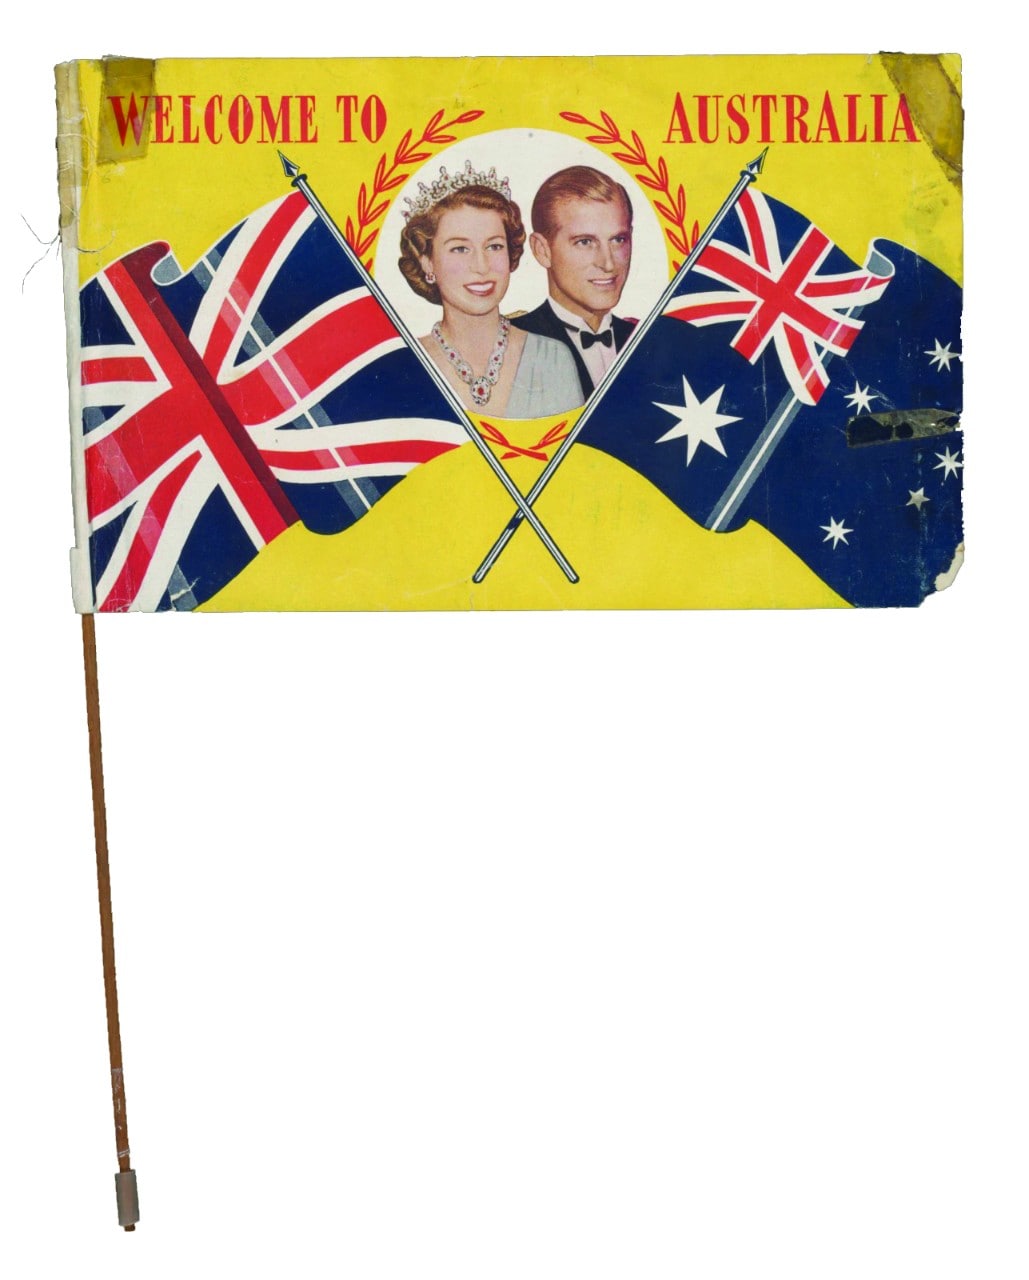 A flag saying welcome to Australia with Queen Elizabeth and Duke of Edinburgh pictured in the centre